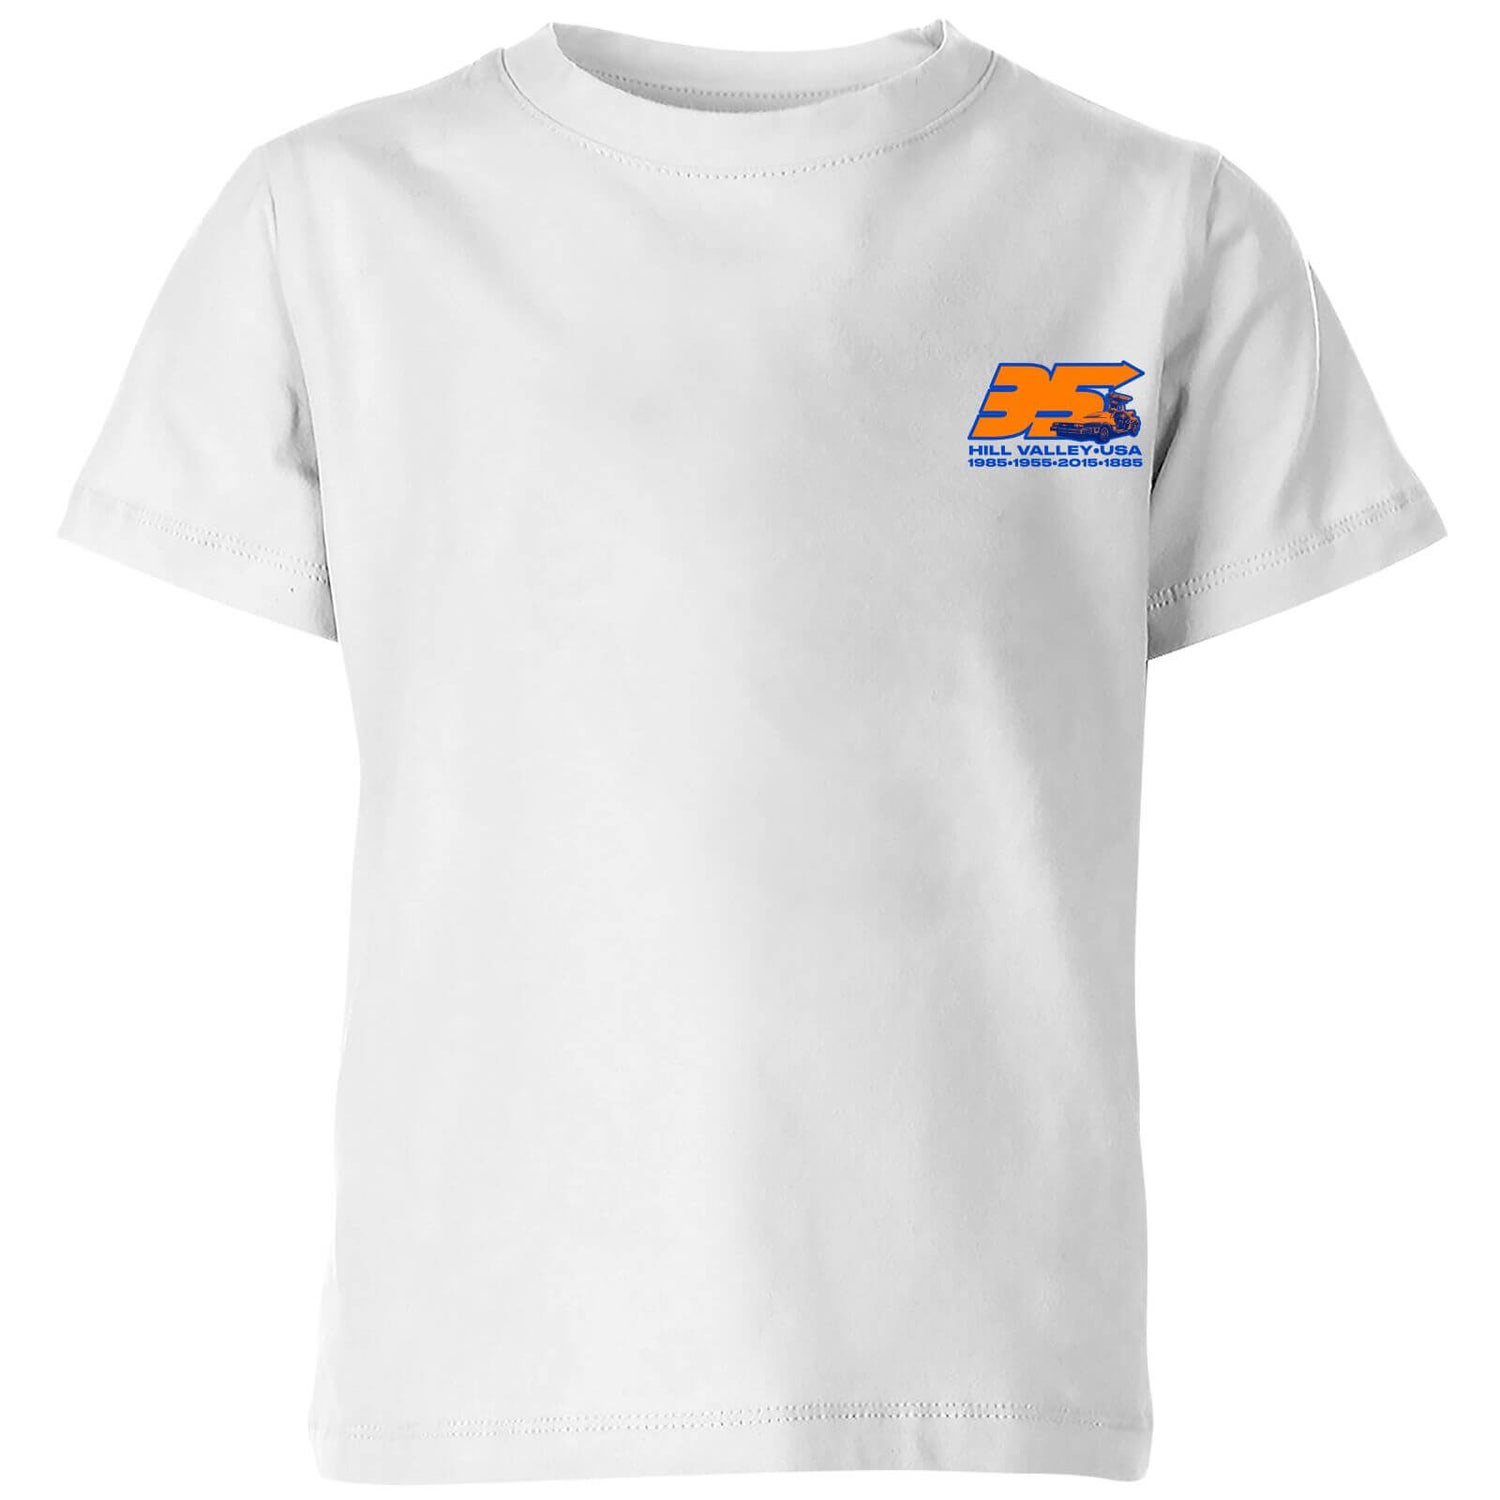 Back To The Future 35 Hill Valley Front Kids' T-Shirt - White